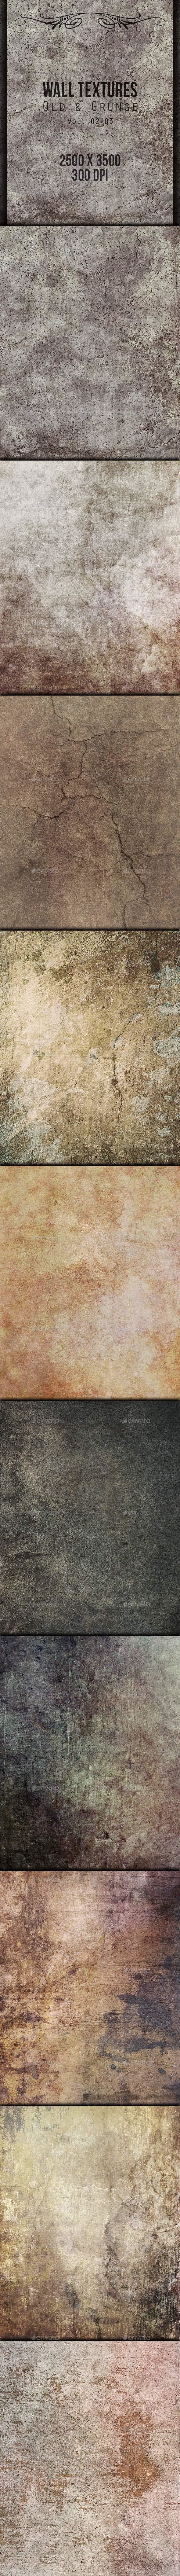 Wall textures old grunge 02 preview